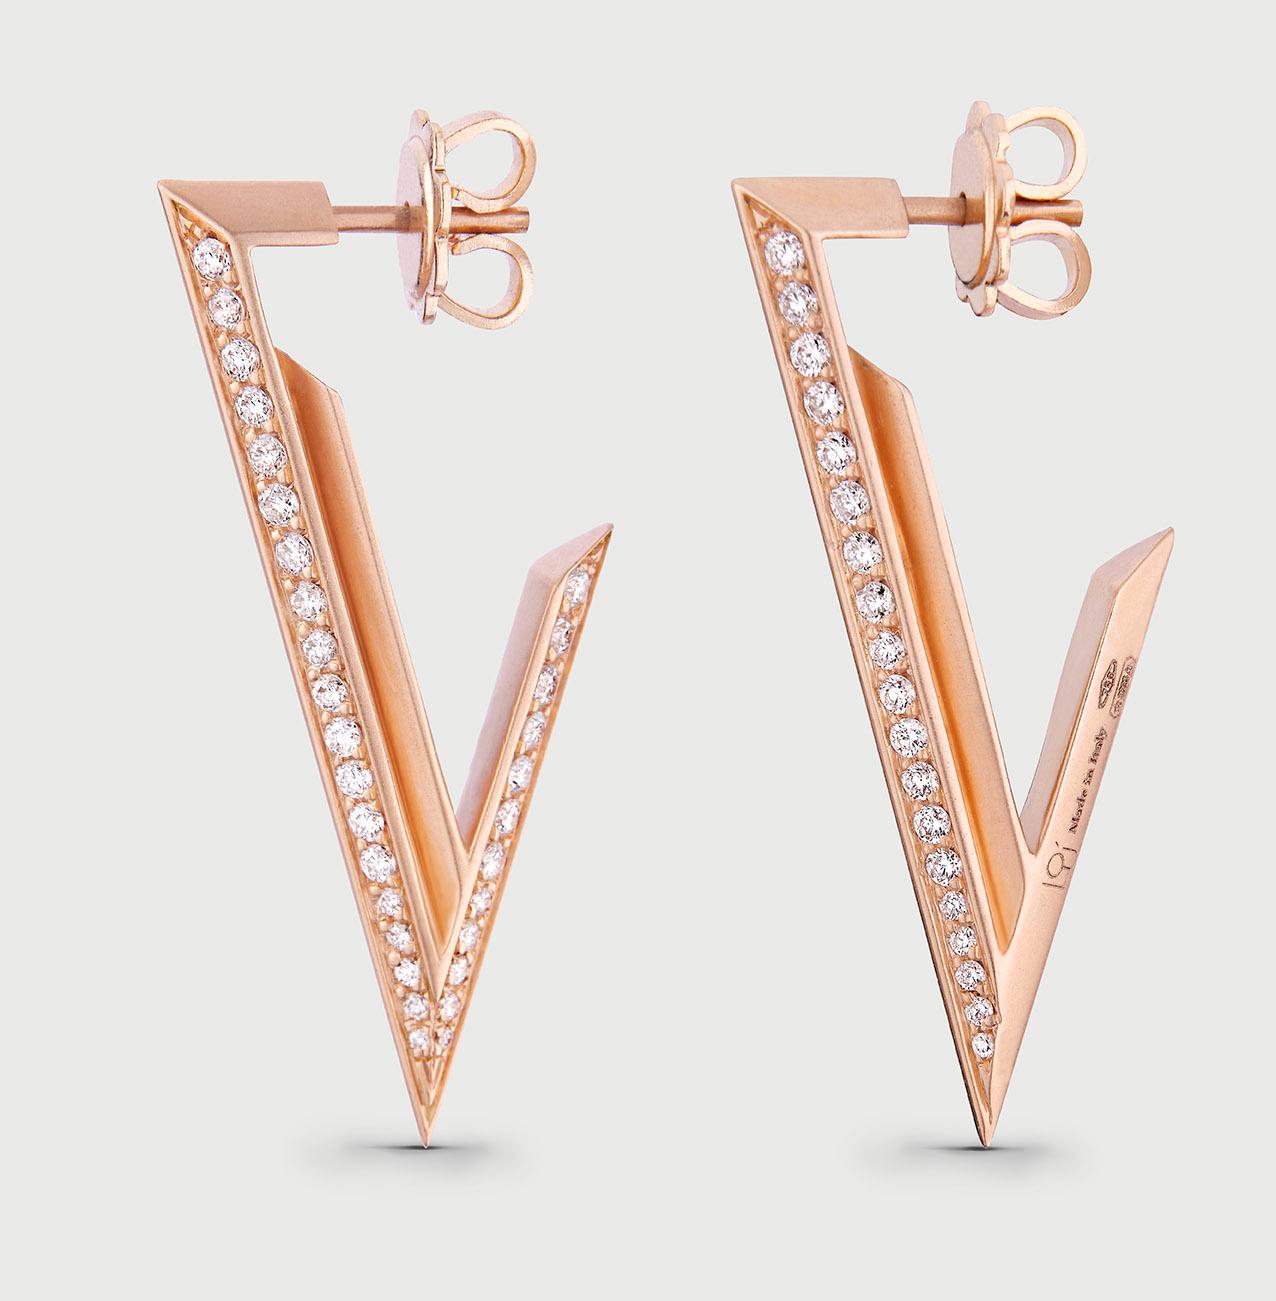 Large Earrings crafted in 18K Rose Gold & White Diamonds 0.85 ct.  18K Matt Rose Gold 10.18 gr. 

Hand crafted and made in Italy. Gemstones are natural and not treated. 

Design is inspired by sacred geometry - the triangle. 
Triangles are a